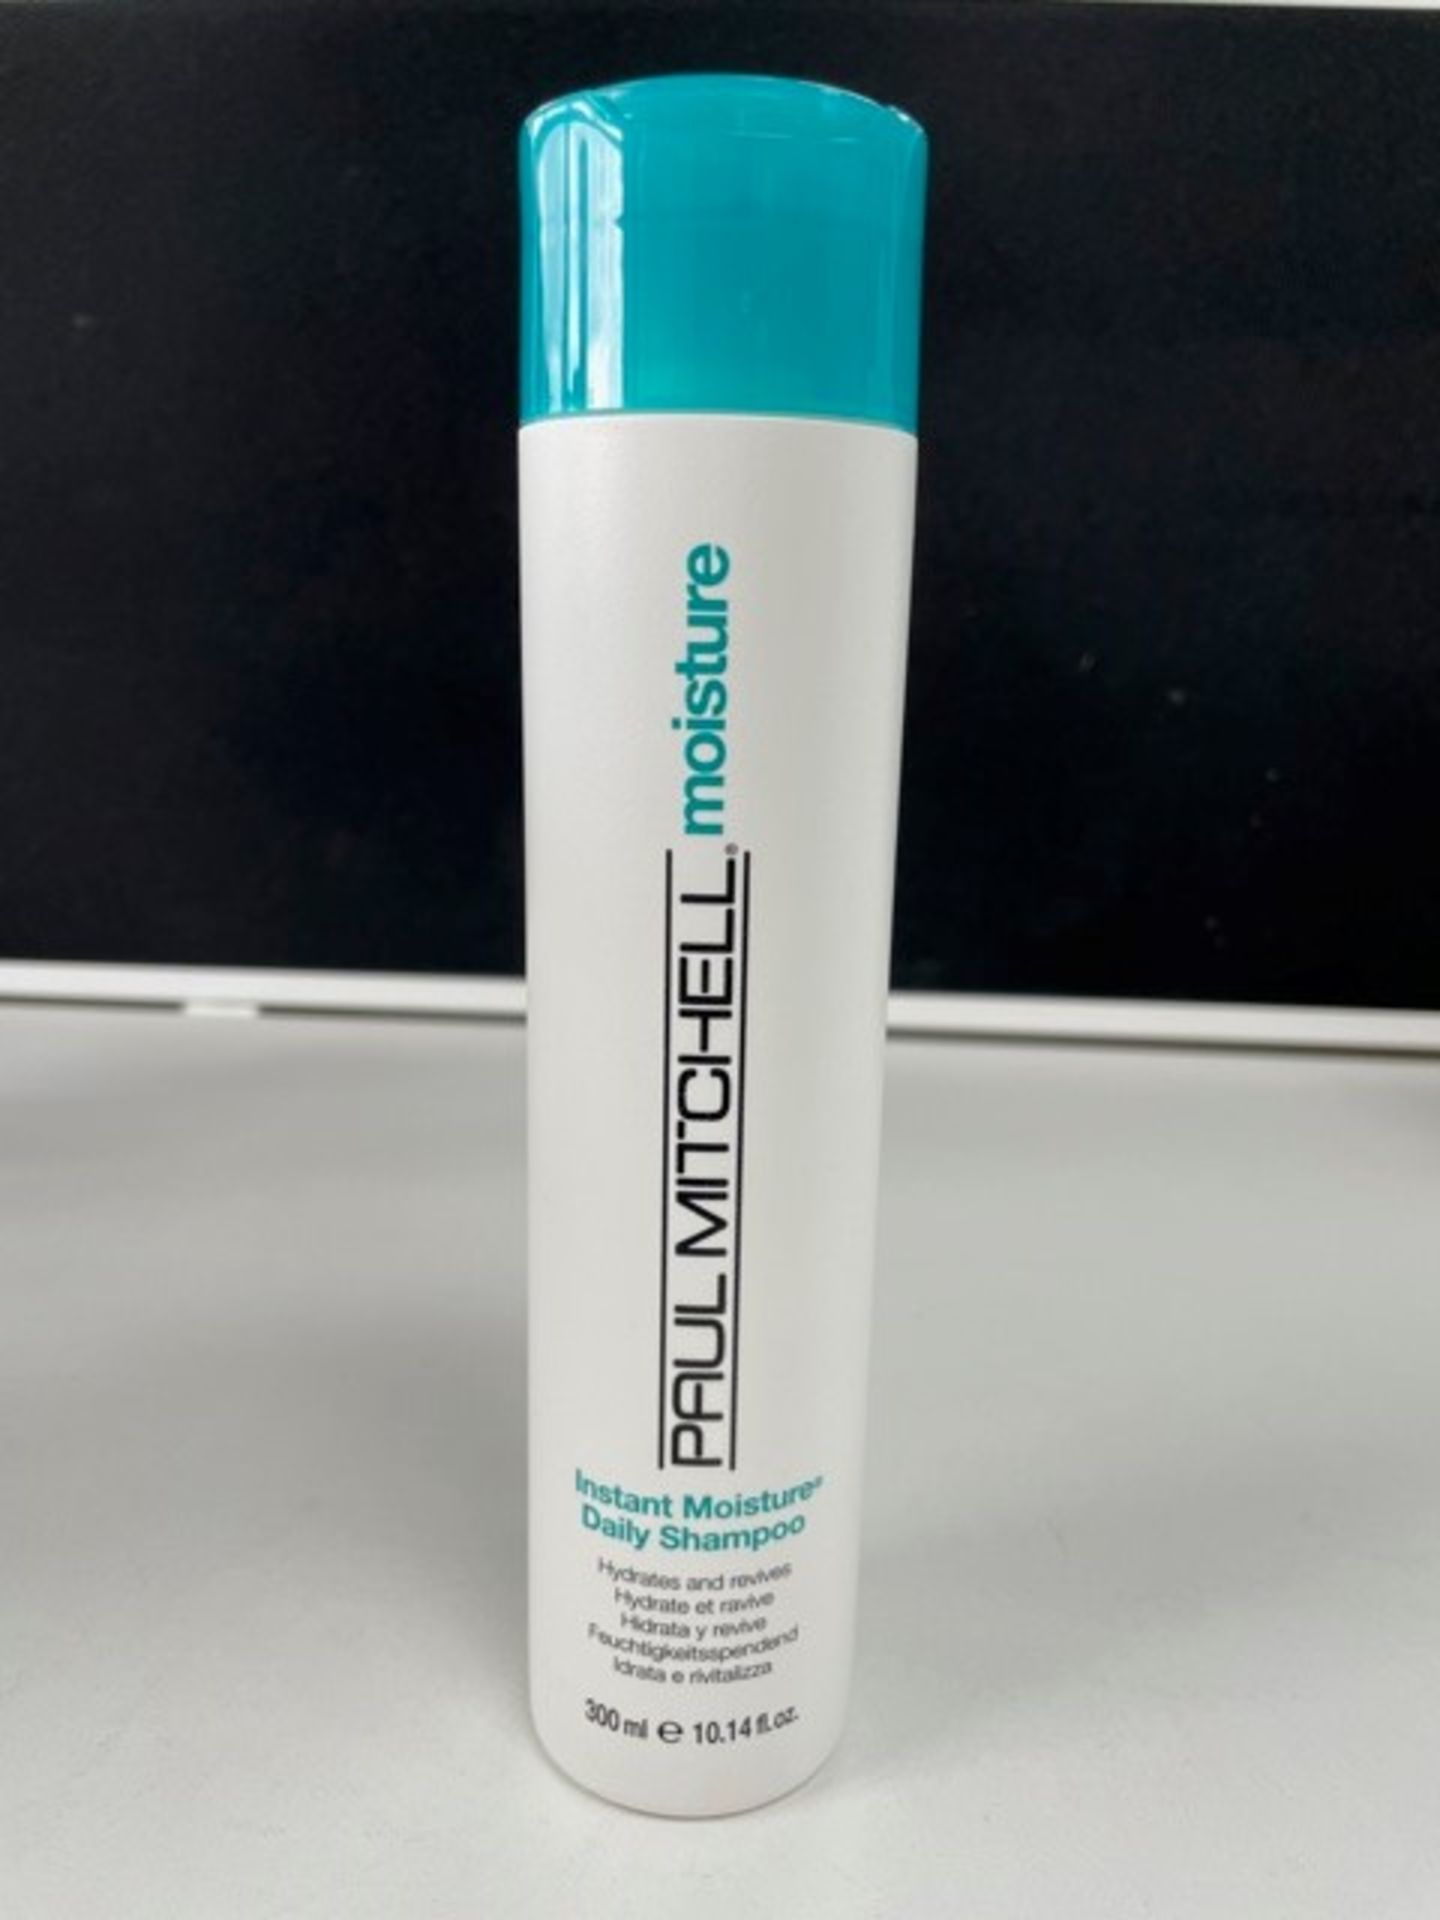 5 x Paul Mitchell Daily Shampoo | 300ml | Total RRP £62.50 - Image 2 of 2